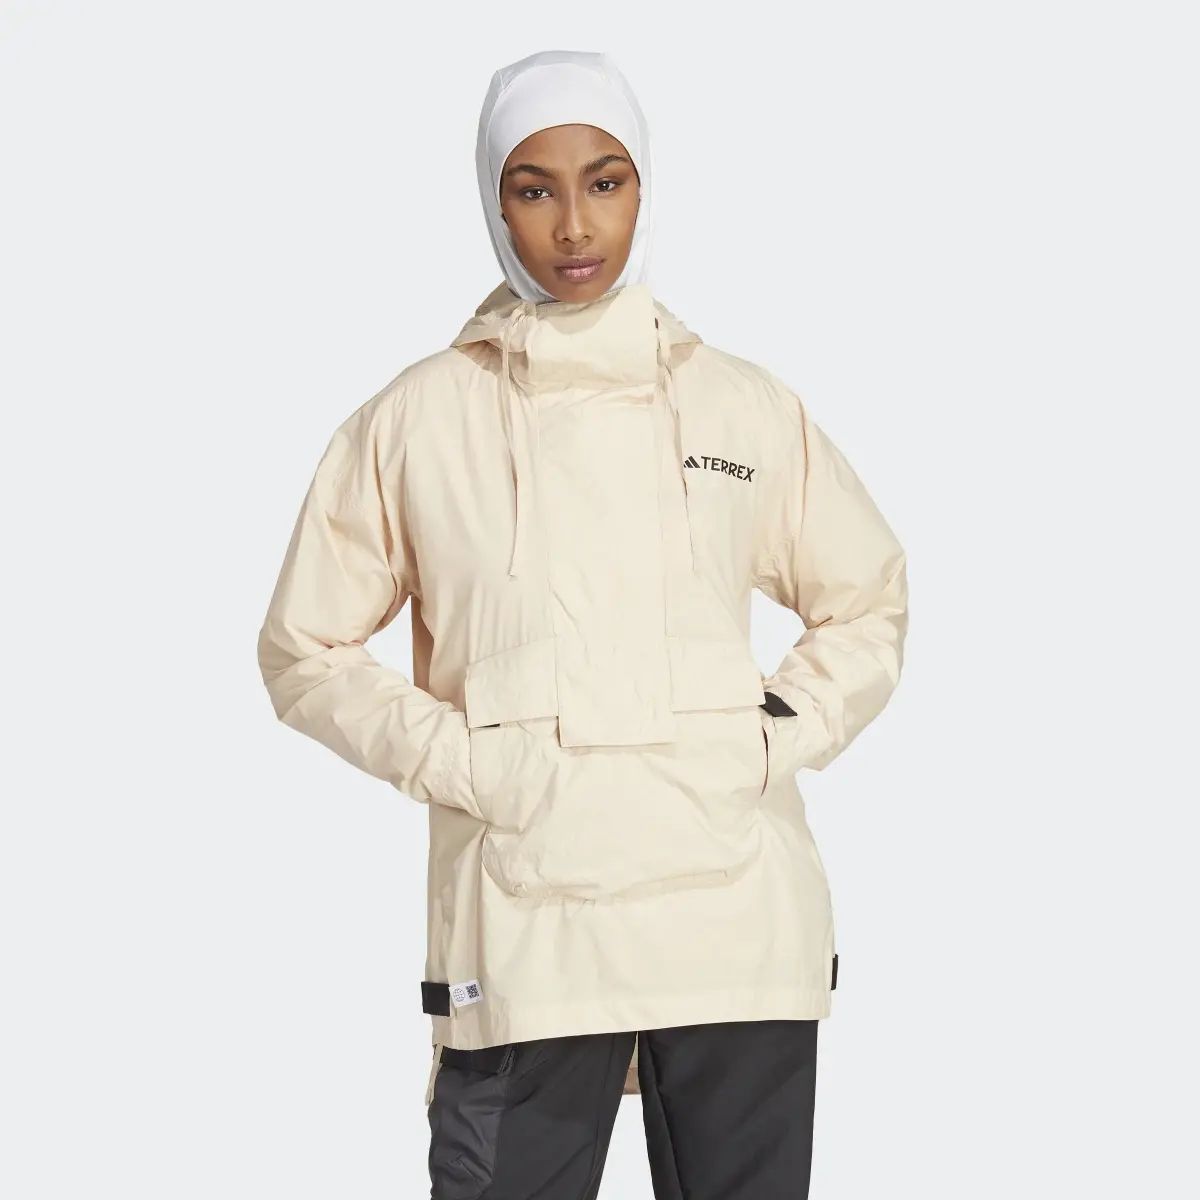 Adidas TERREX Made to Be Remade Wind Anorak. 2